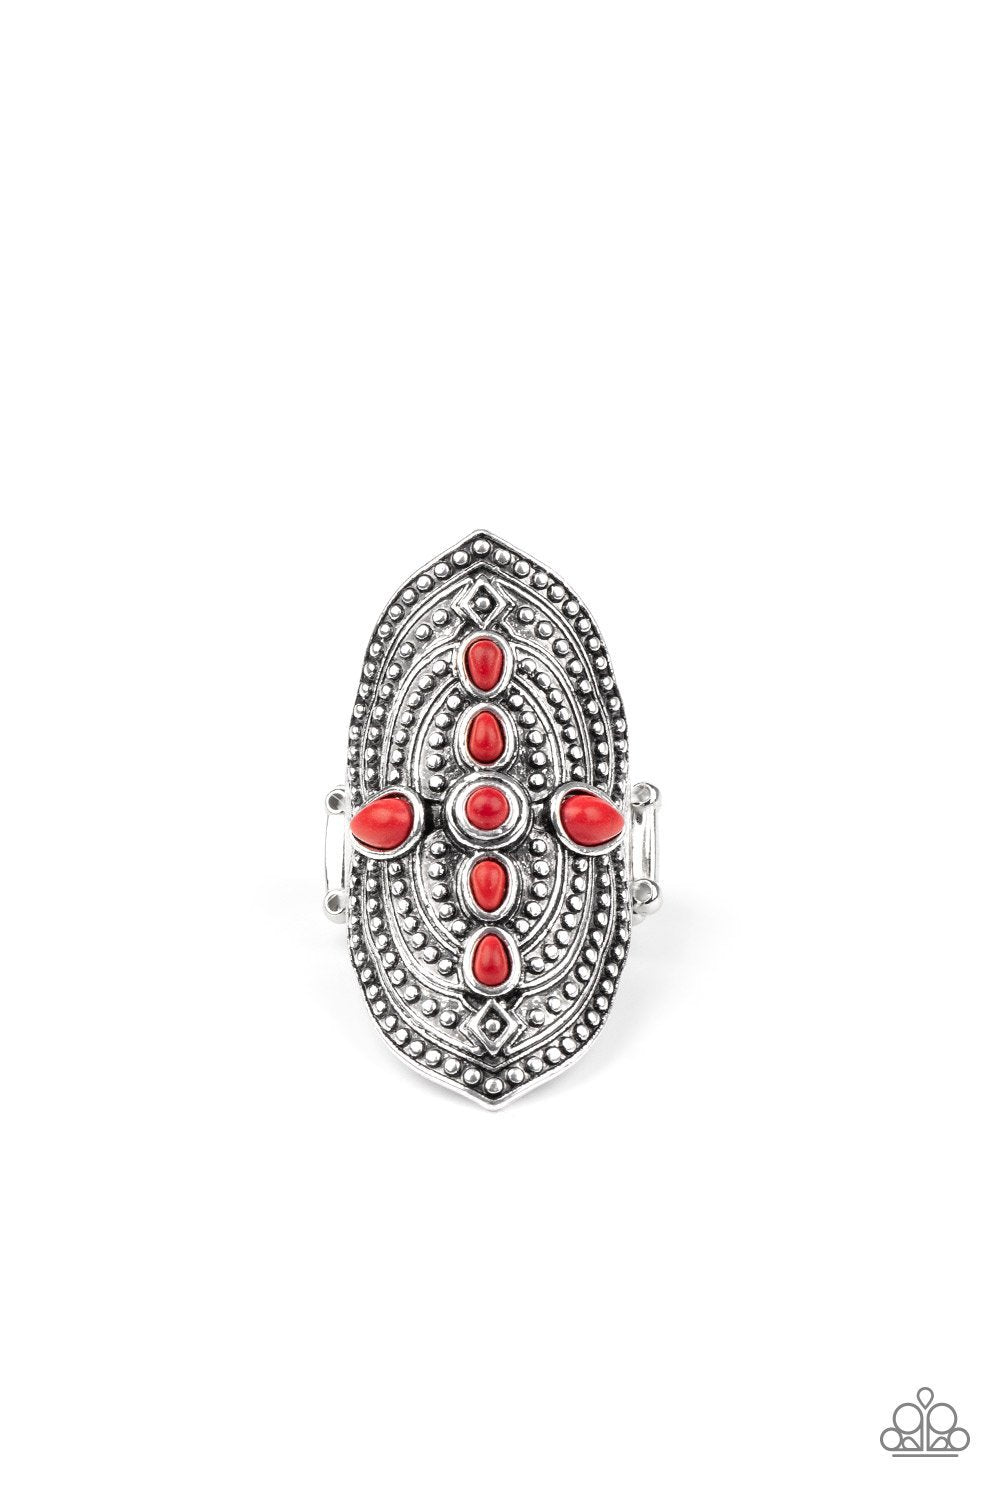 Shield In Place Red Stone Ring - Paparazzi Accessories- lightbox - CarasShop.com - $5 Jewelry by Cara Jewels